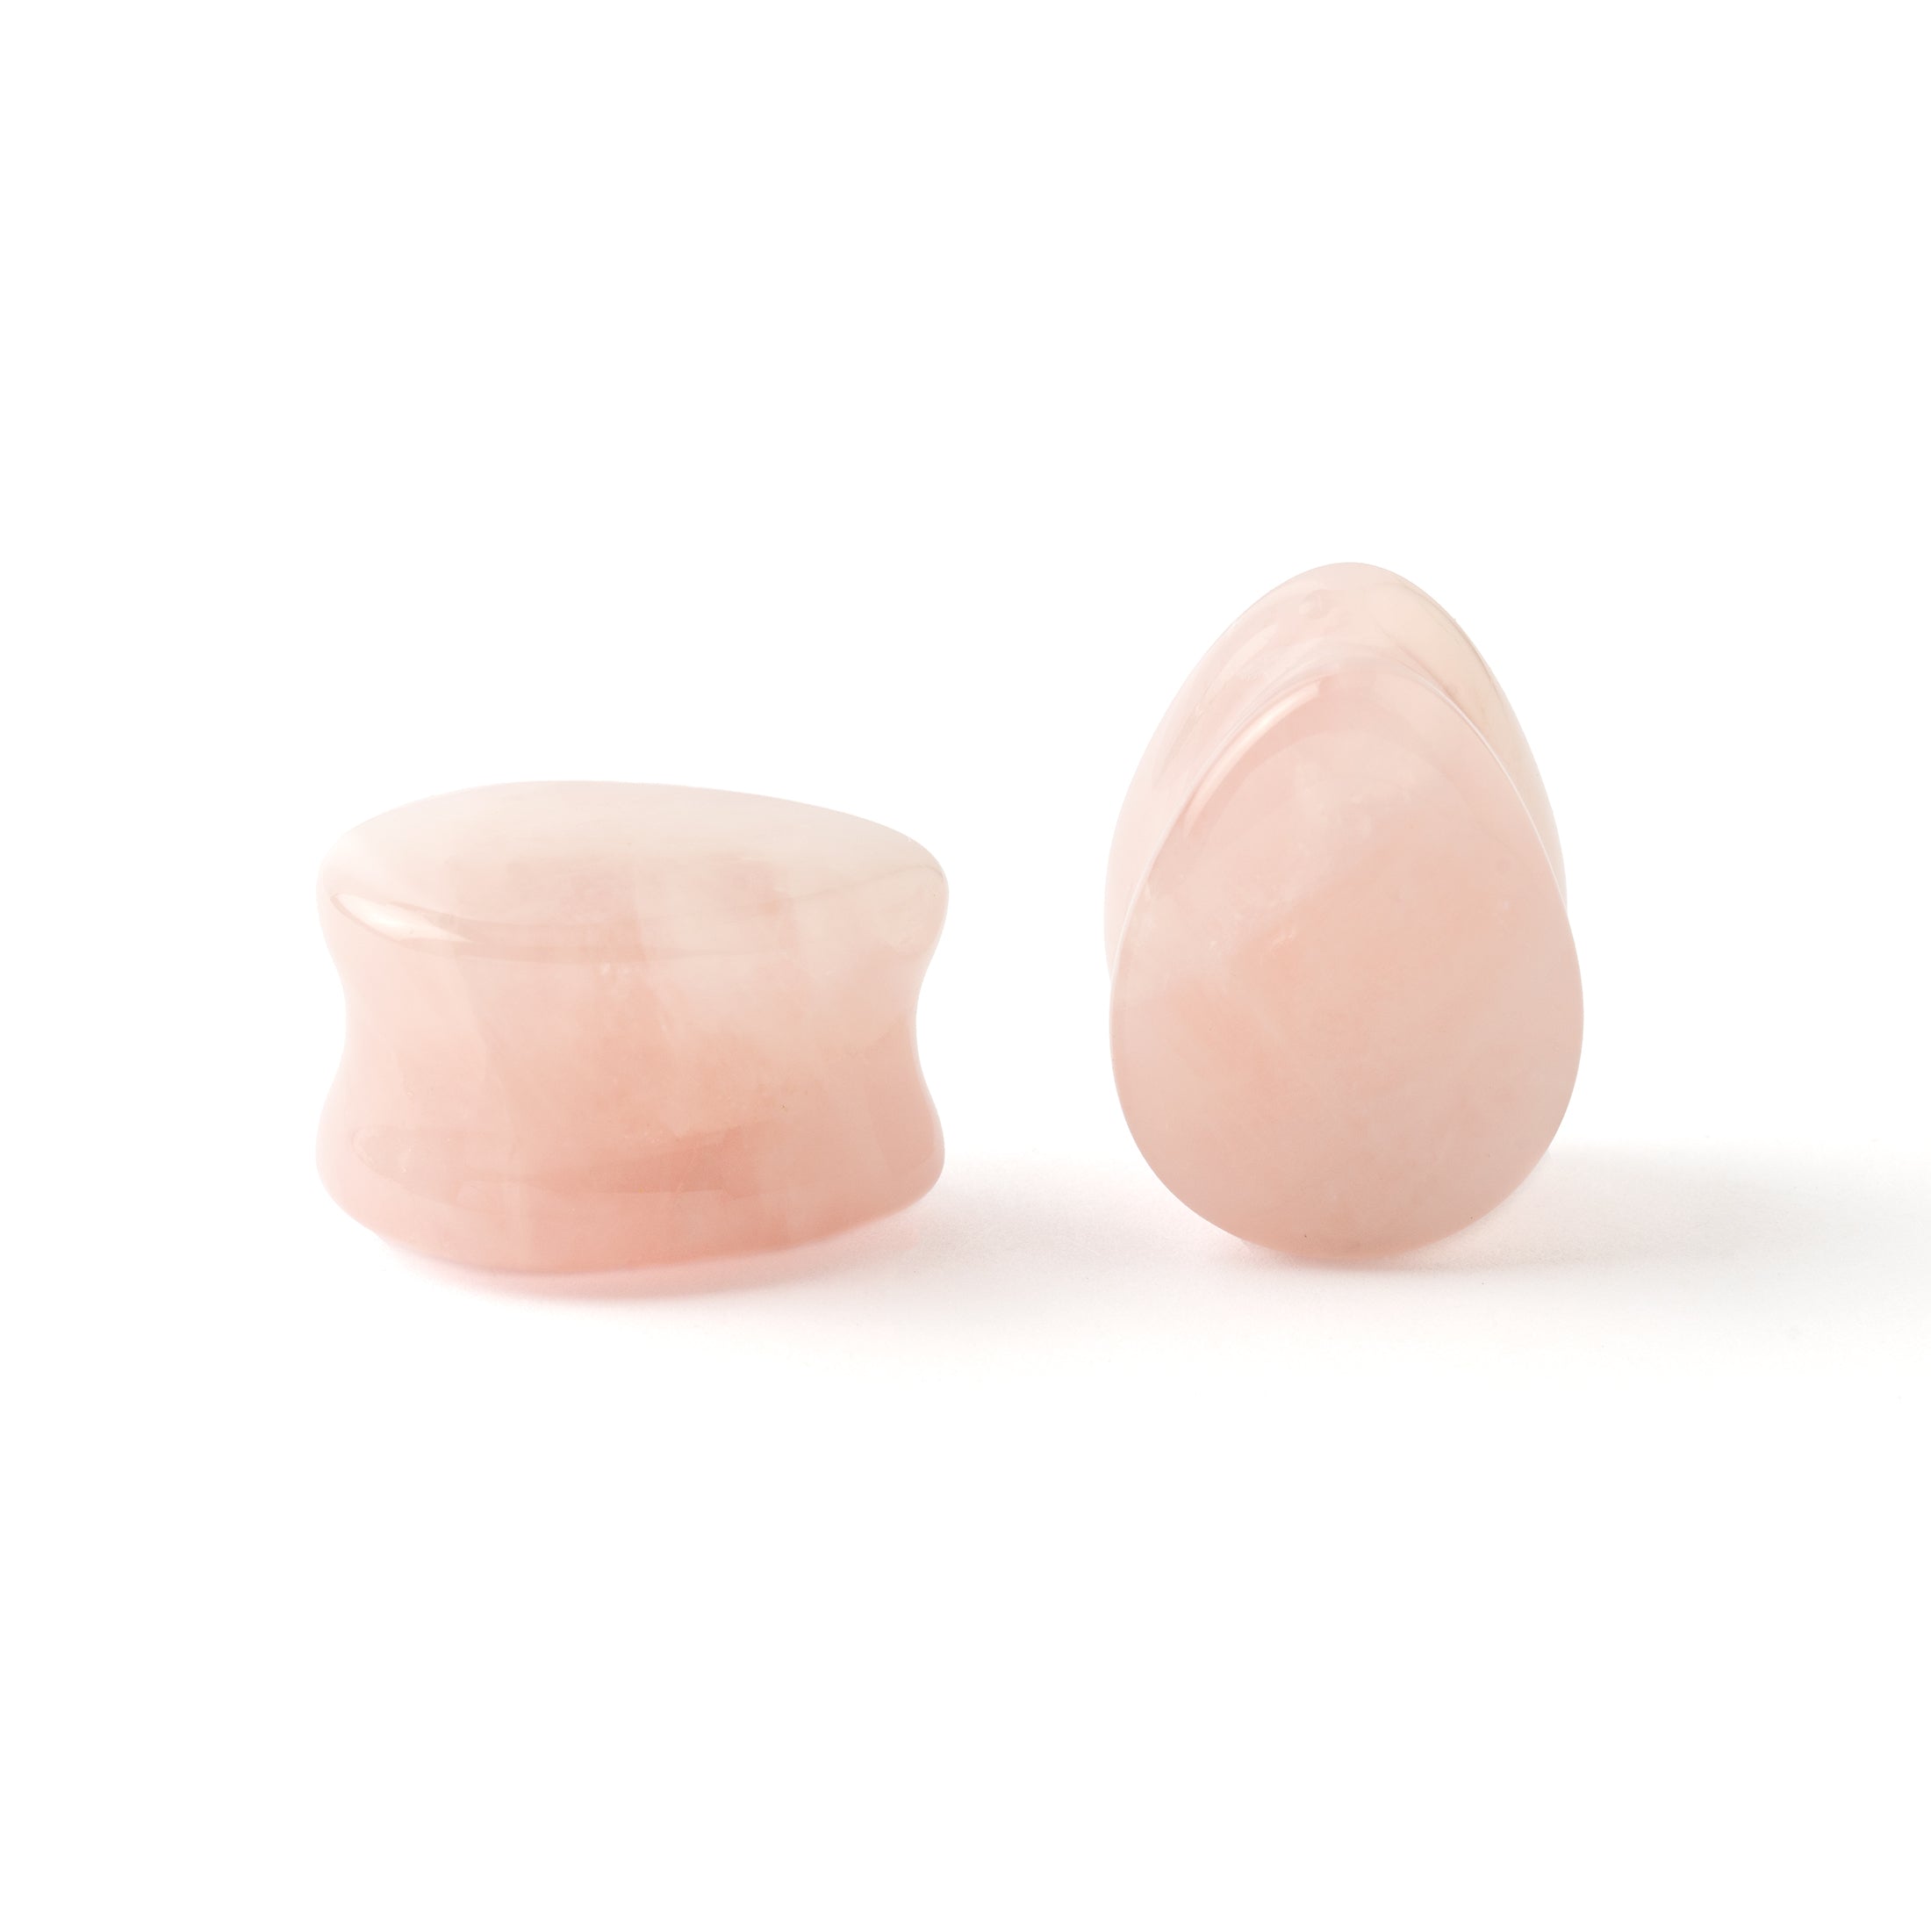 Teardrop Rose Quartz stone Plugs front and side view